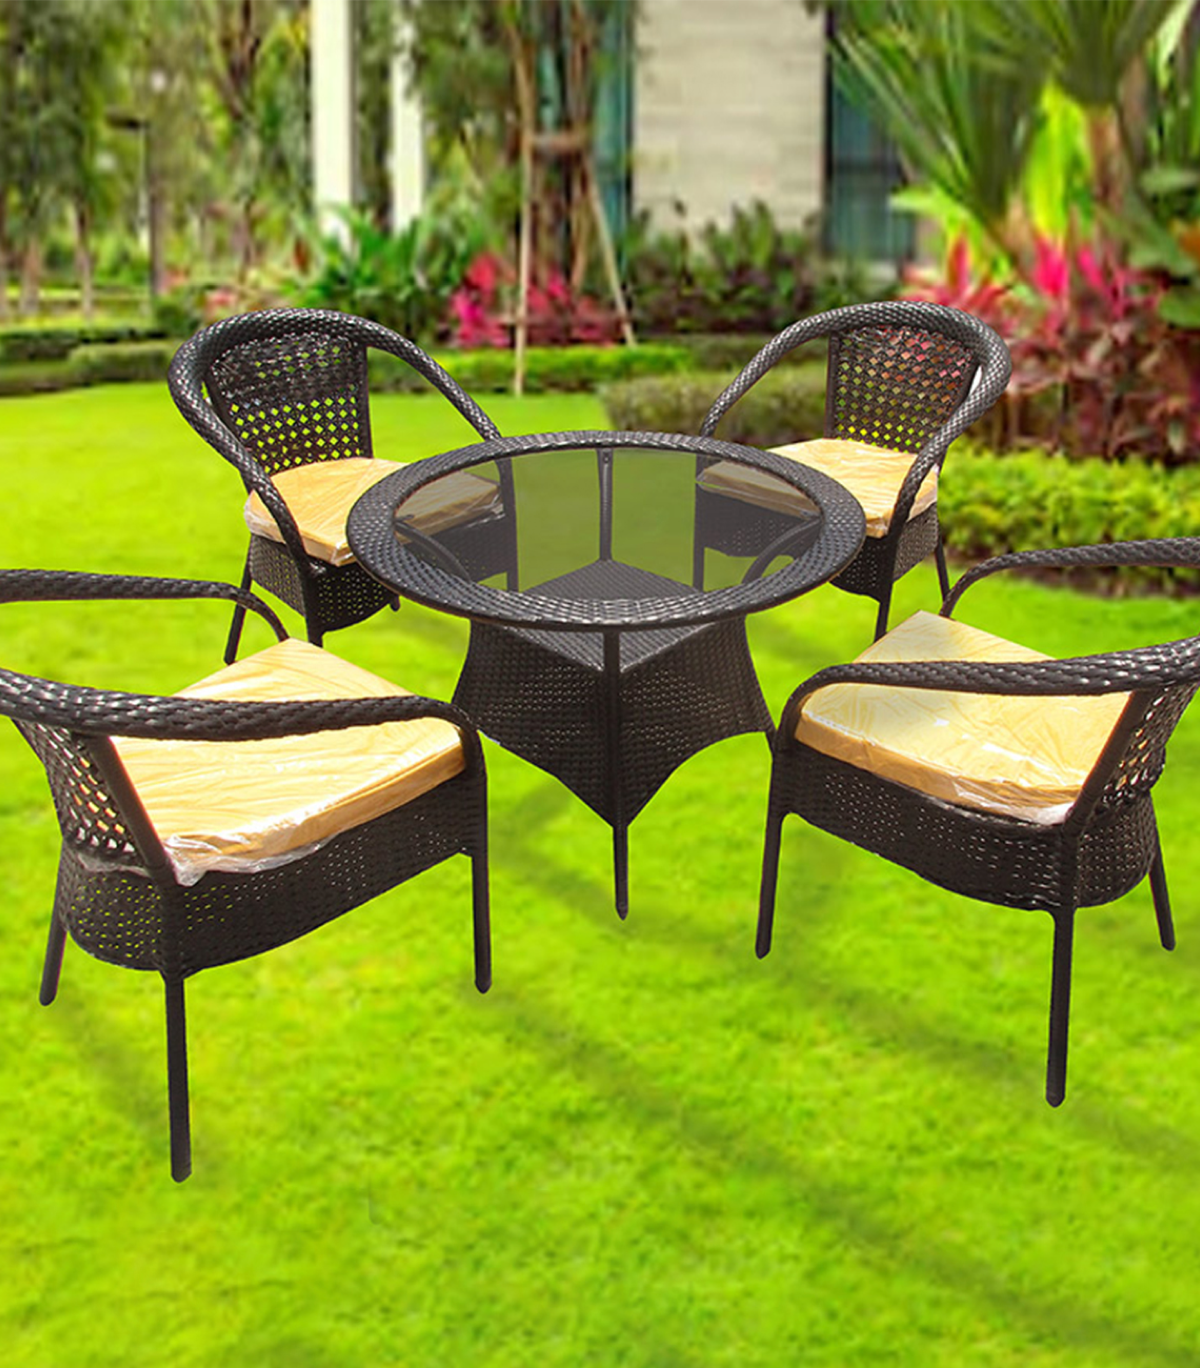 4 + 1 Patio Table & Sets